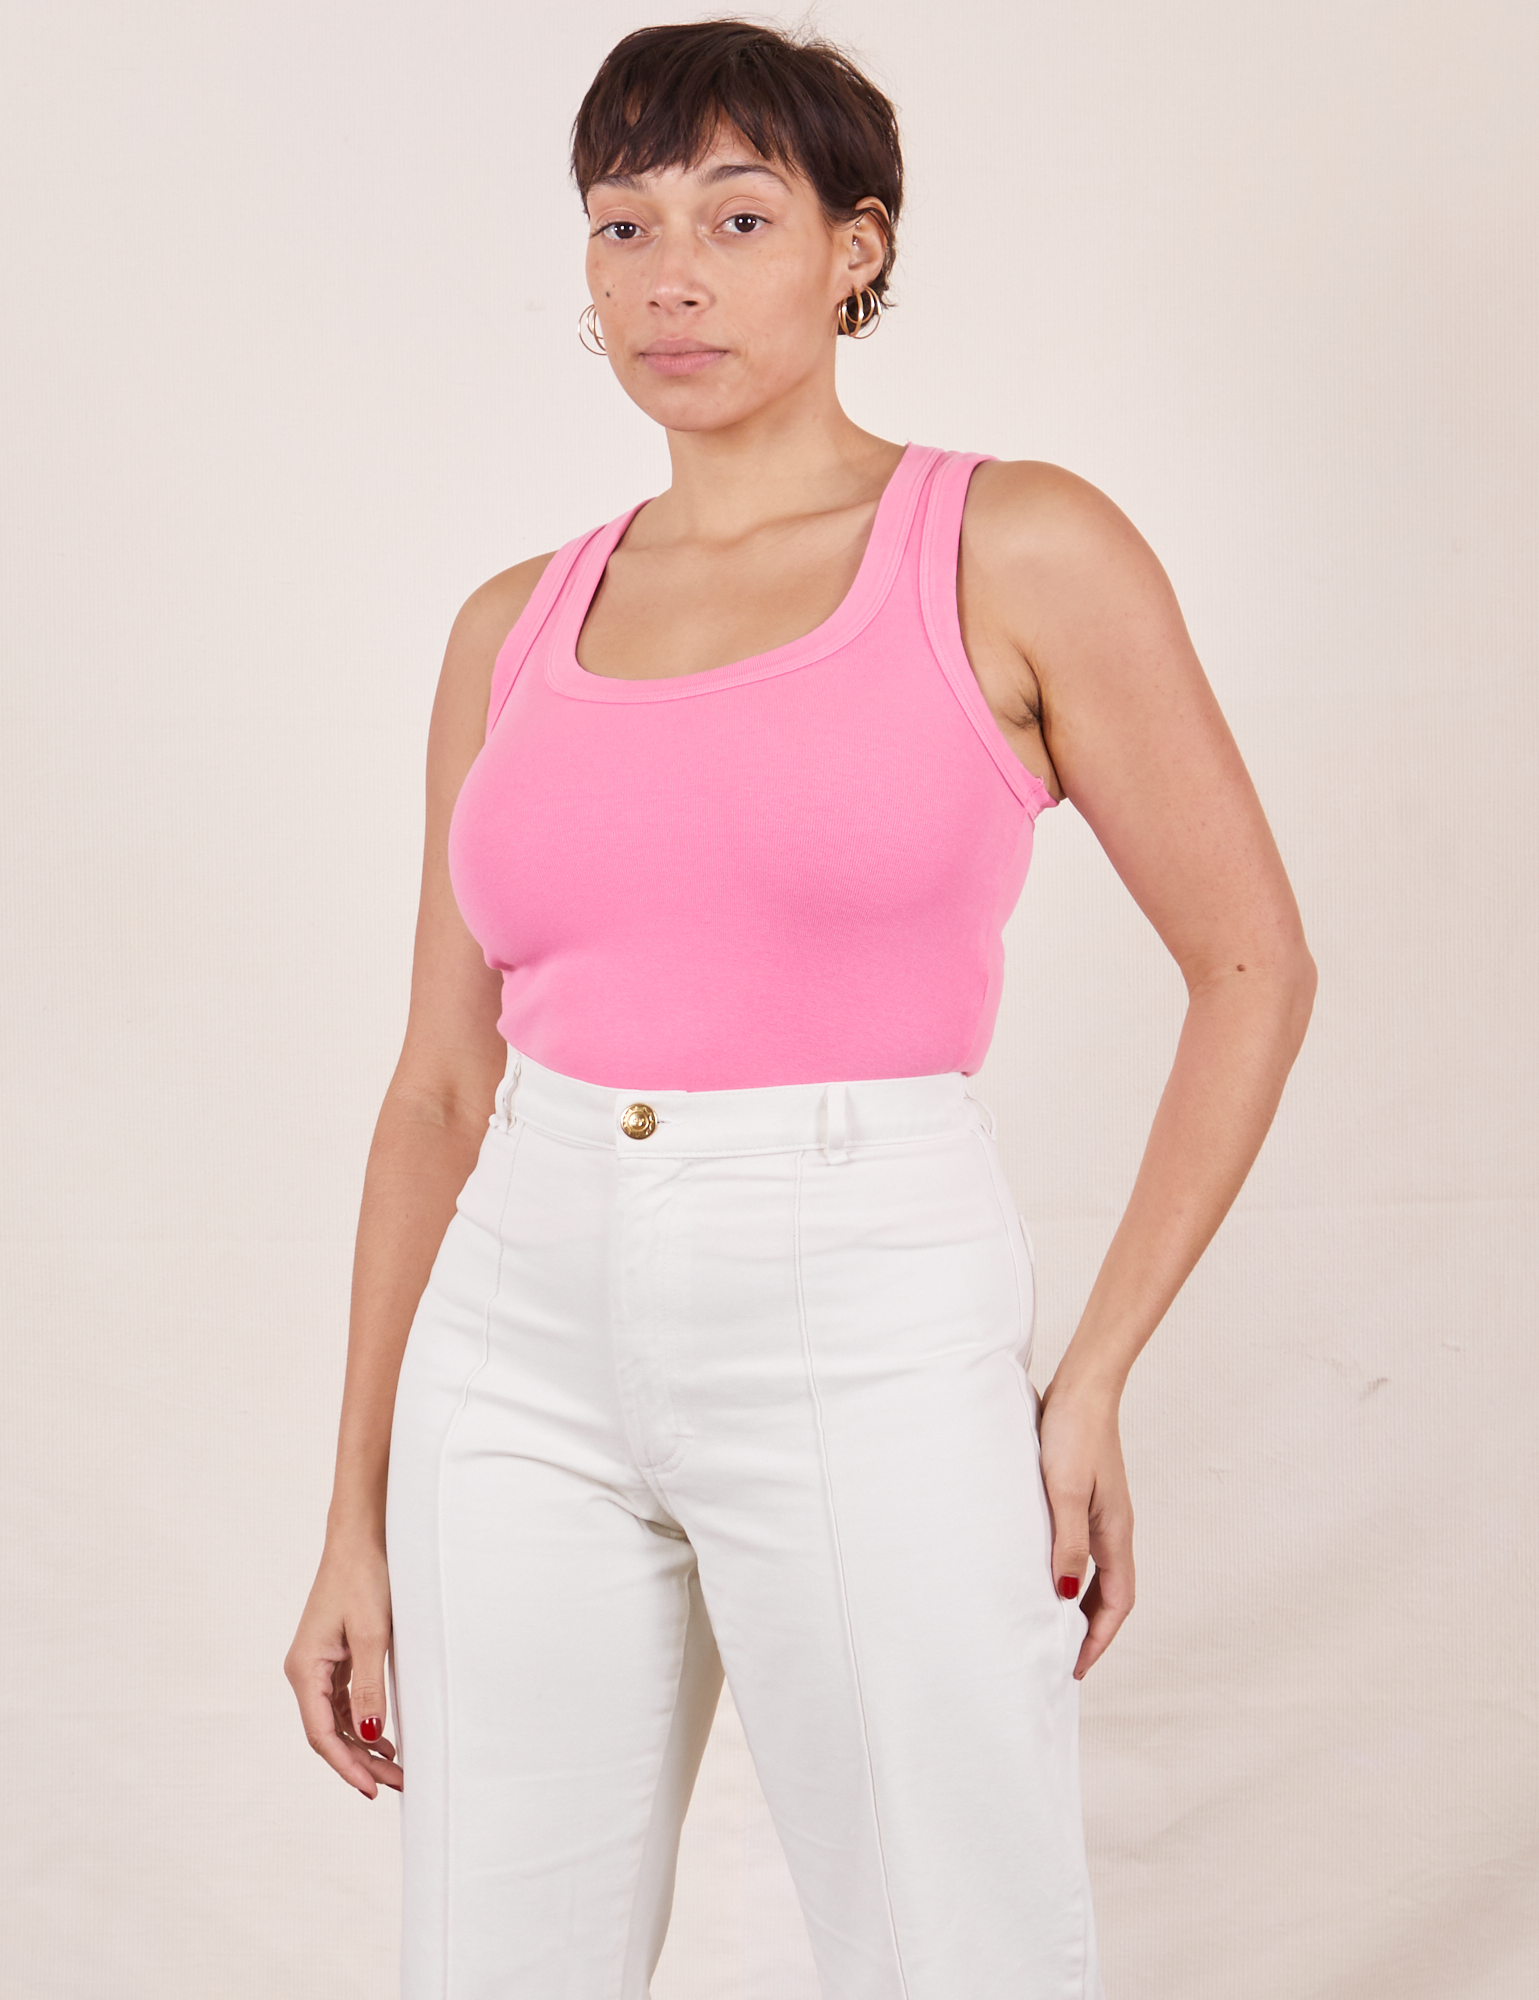 Tiara is wearing size S Tank Top in Bubblegum Pink paired with vintage tee off-white Western Pants